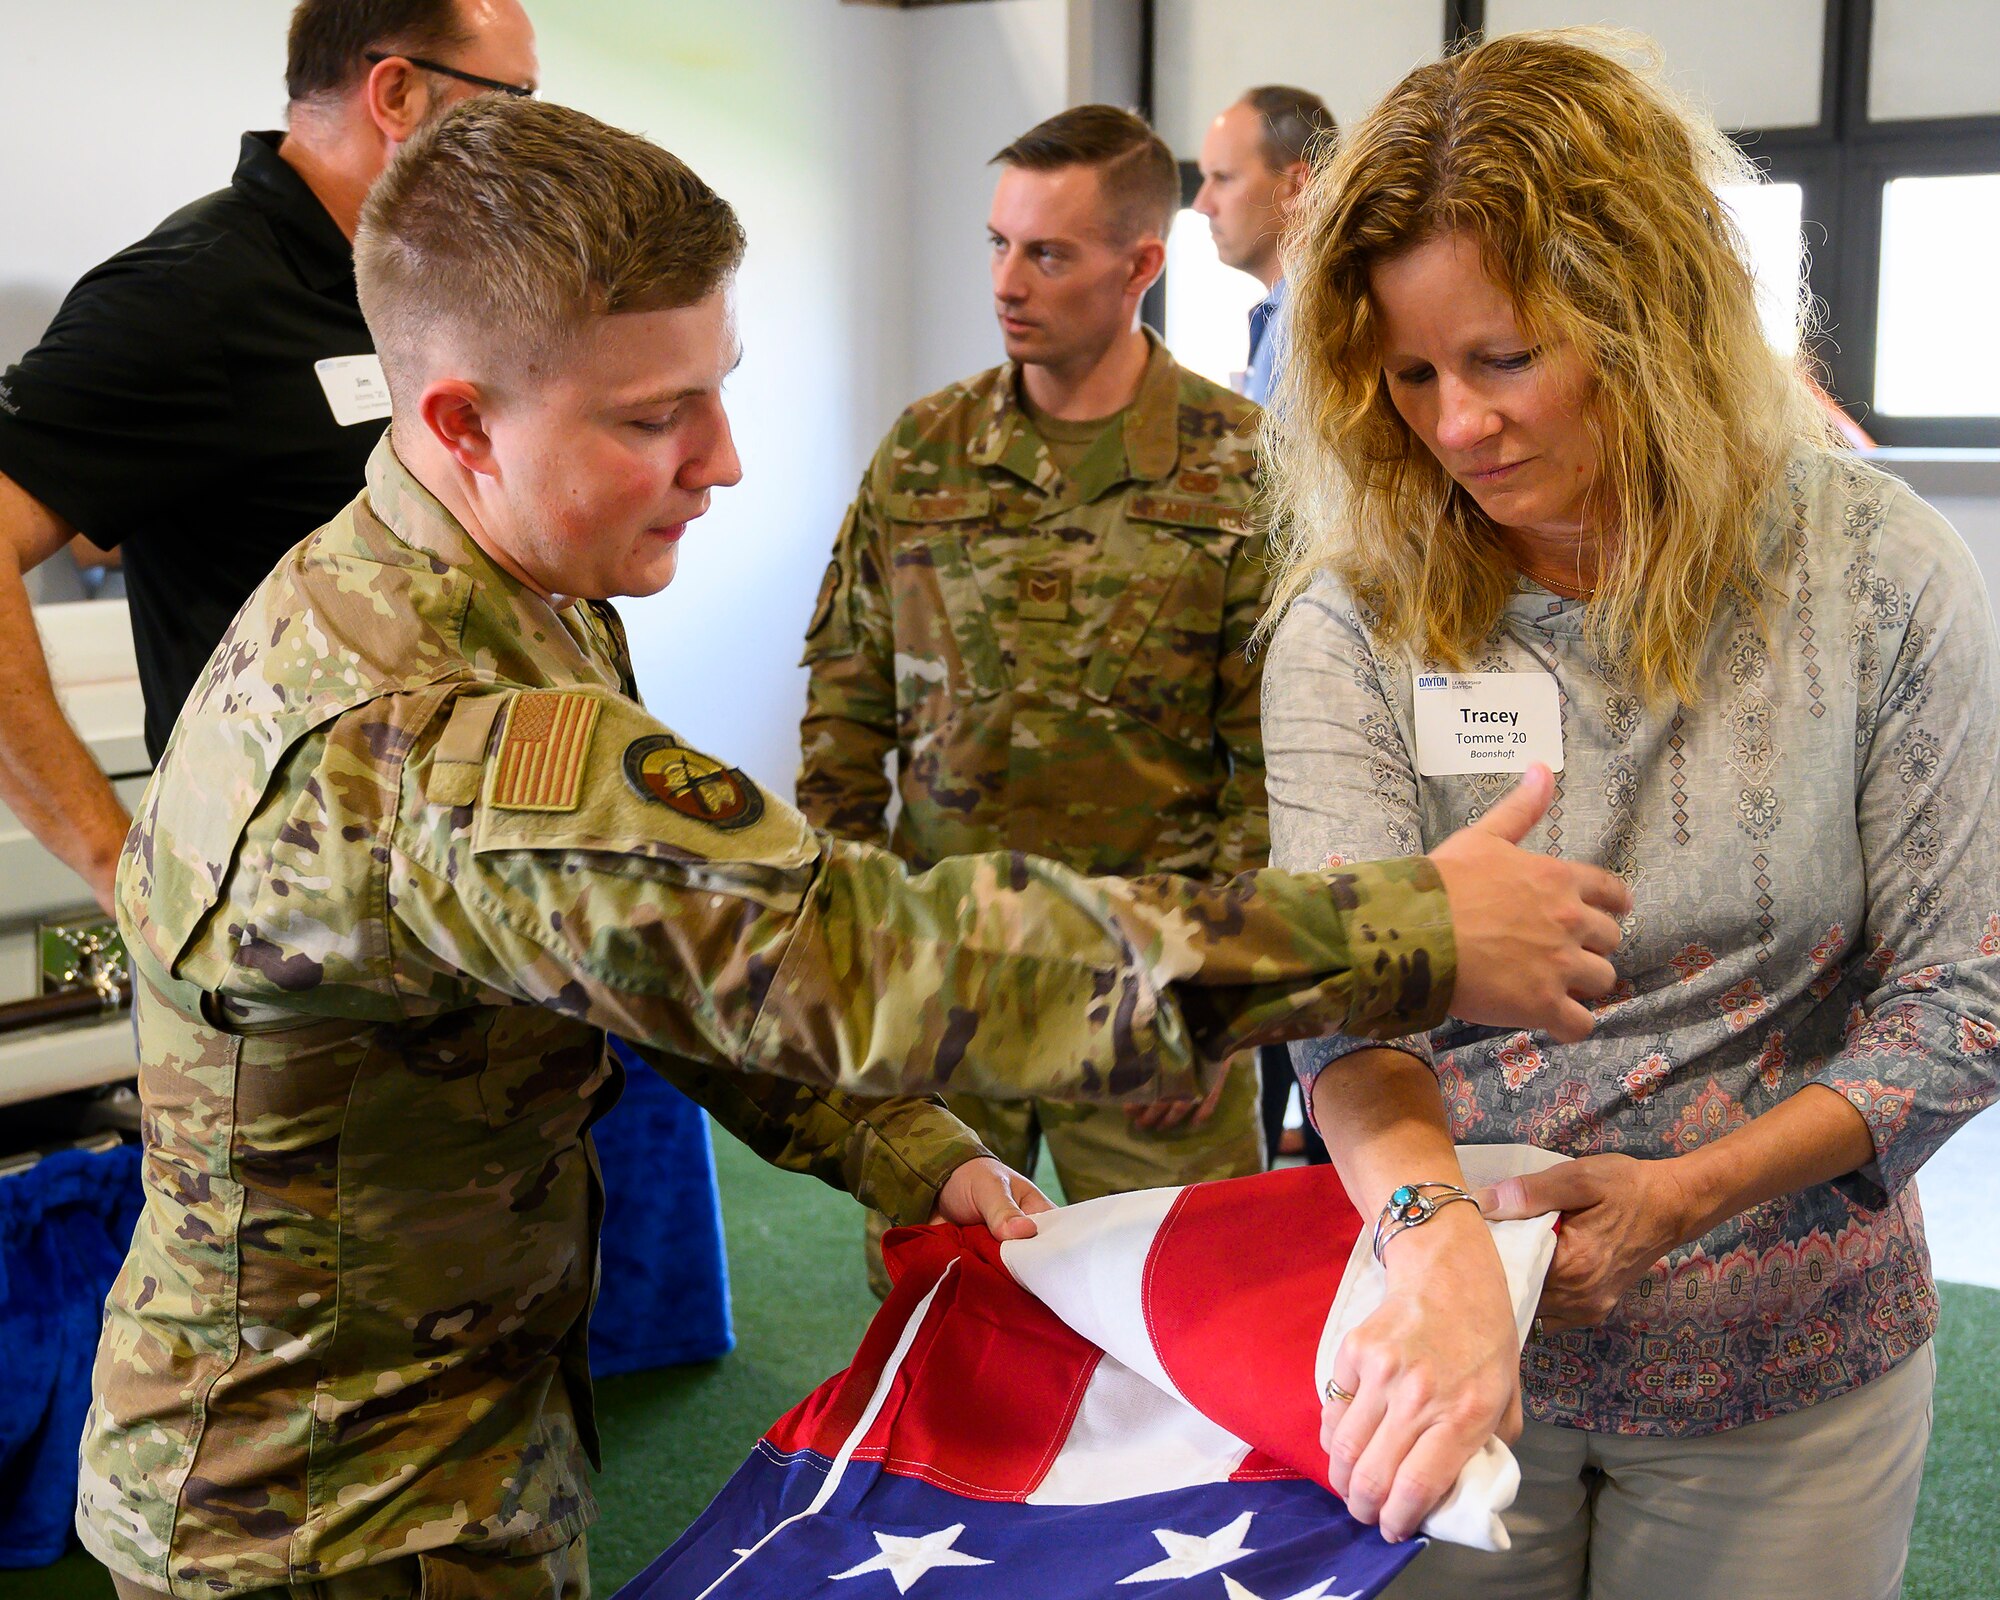 Airman 1st Class Blake Cassick of Wright-Patterson Air Force Base’s Honor Guard shows Tracey Tomme how to ceremoniously fold the flag July 14. A Leadership Dayton program member, Tomme was part of the group tour allowing participants to learn about the base’s capabilities and its community contributions. (U.S. Air Force photo by R.J. Oriez)